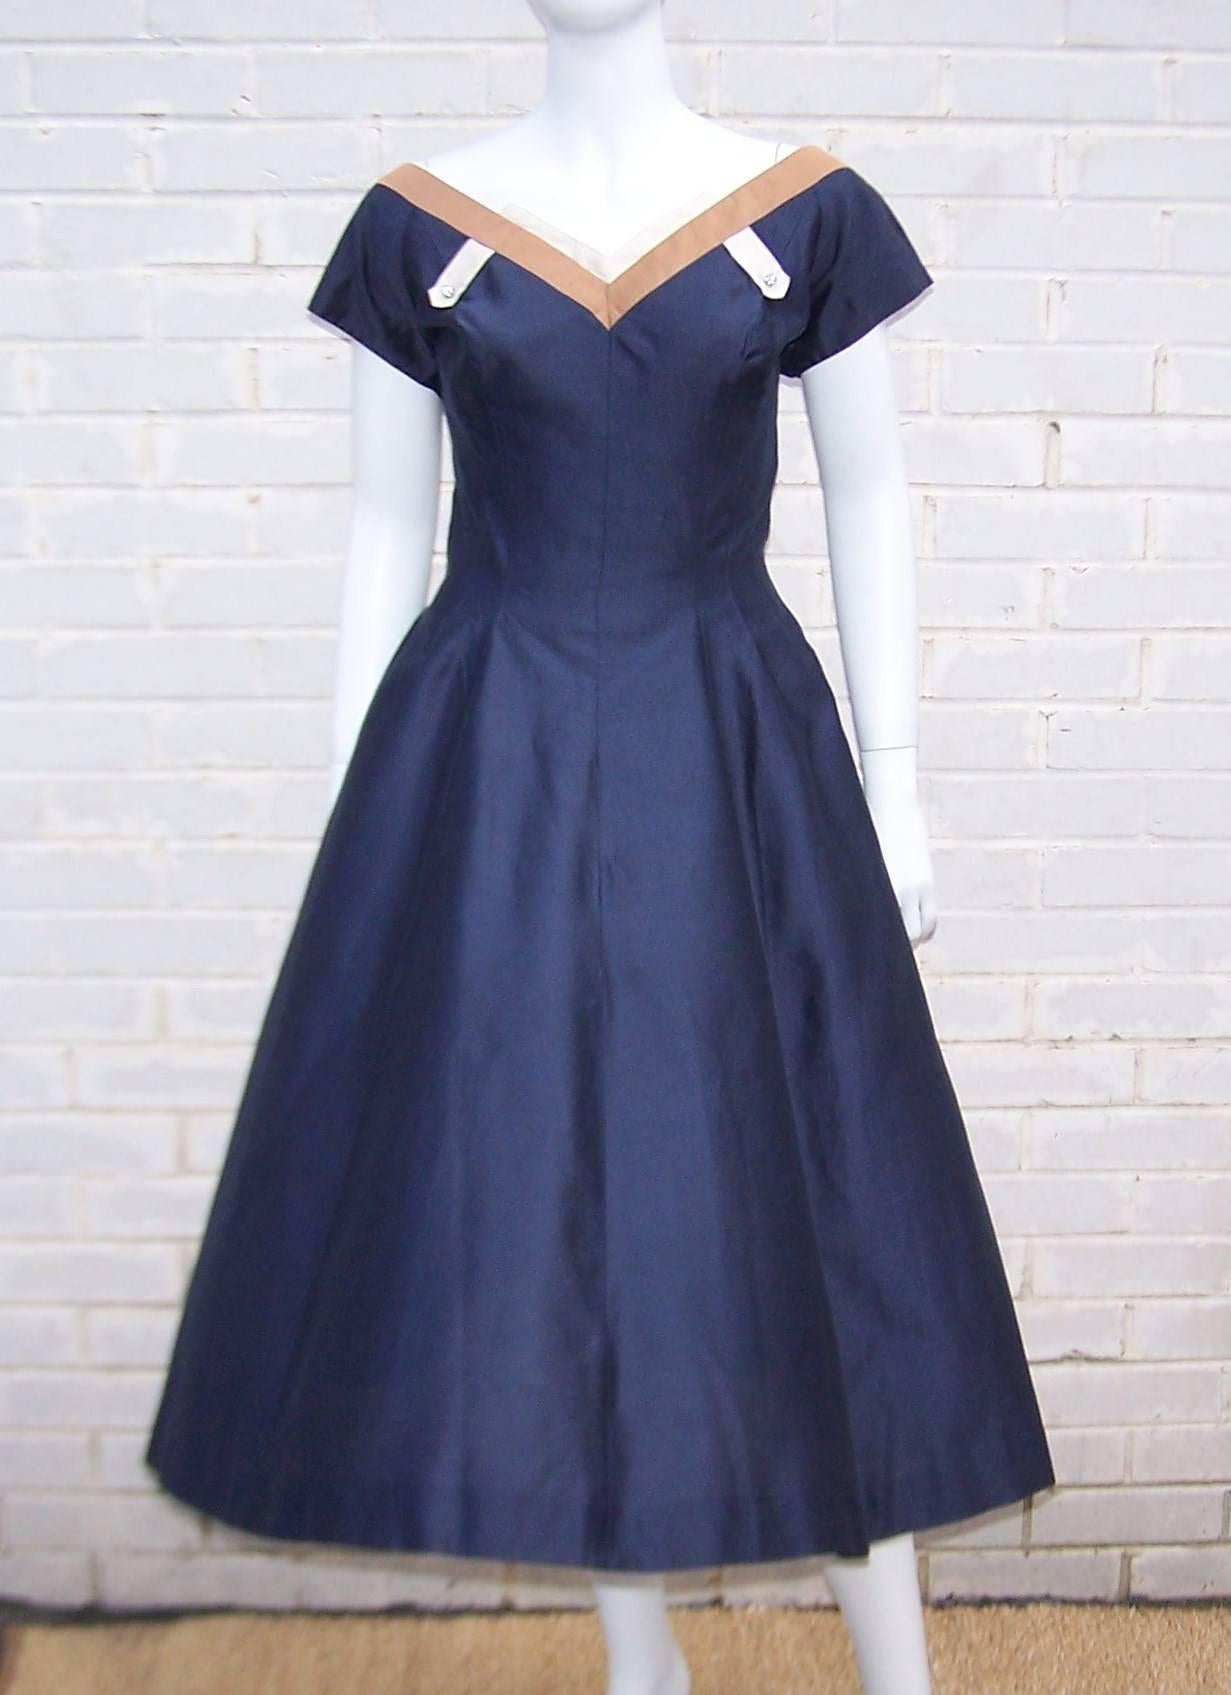 Combine a 1950's feminine silhouette and contrasting graphic details and you have a party dress perfect for a modern day wardrobe.    The weighty polished navy blue fabric provides volume to the full circle skirt while the tan and ivory trim